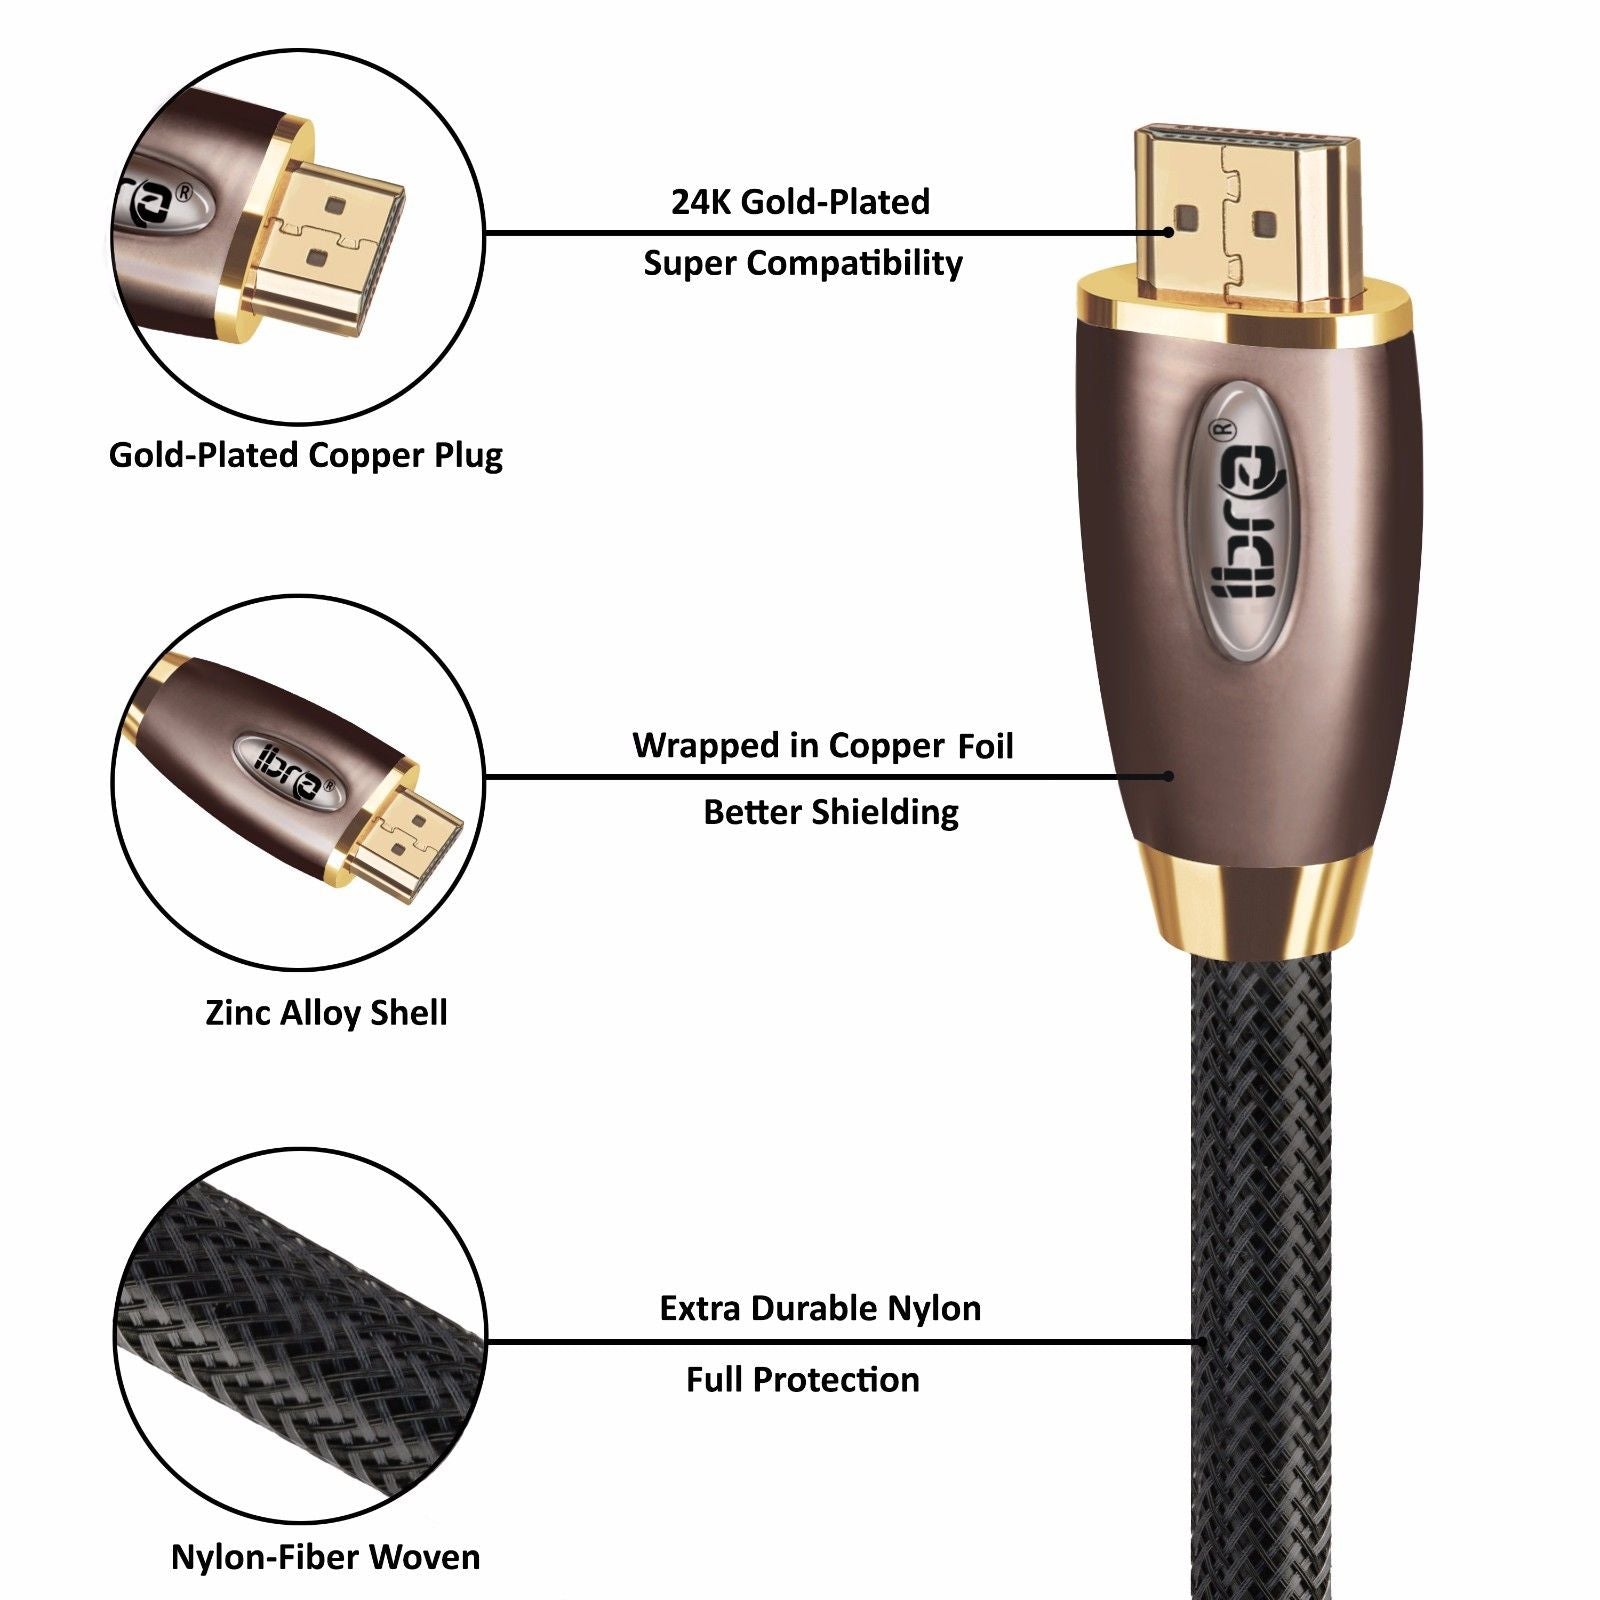 IBRA RED HDMI Cable 10M - 4K UHD HDMI 2.0(4K@60Hz) Ready -18Gbps-28AWG Braided Cord -Gold Plated Connectors -Ethernet,Audio Return -Video 4K 2160p,HD 1080p,3D -Xbox PlayStation PS3 PS4 PC Apple TV